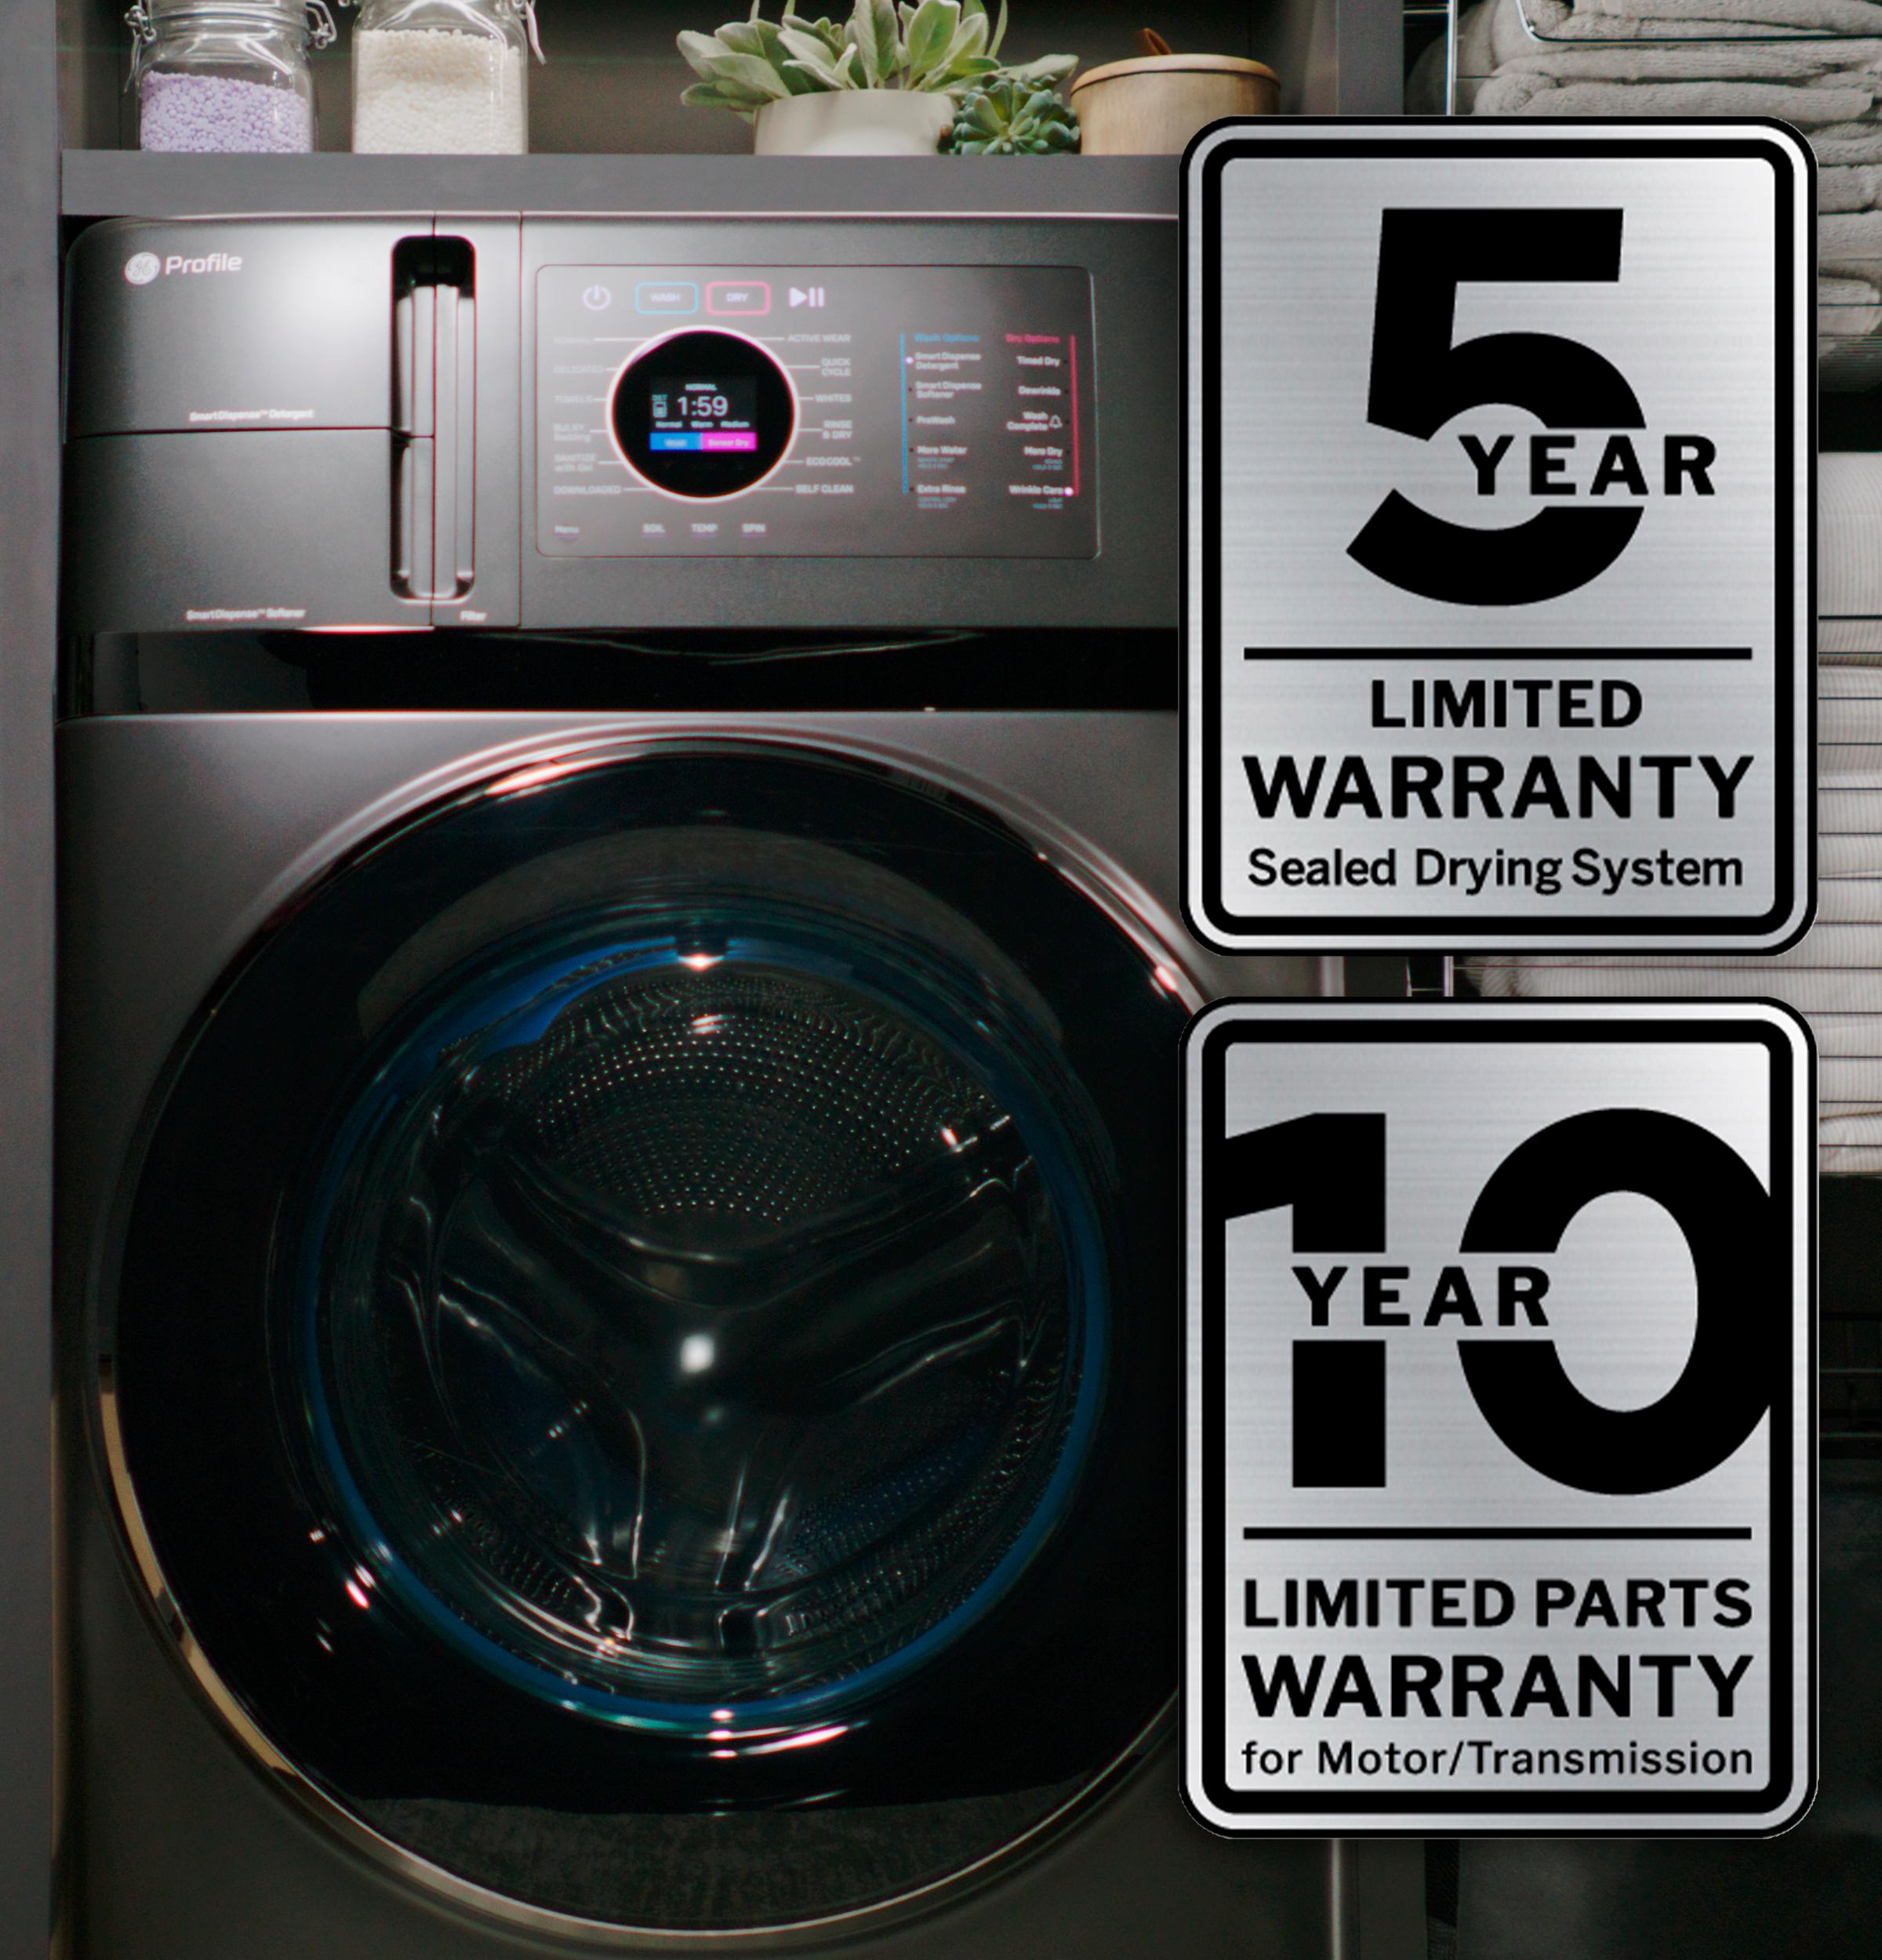 Ge Appliances PFQ97HSPVDS Ge Profile™ 4.8 Cu. Ft. Capacity Ultrafast Combo With Ventless Heat Pump Technology Washer/Dryer